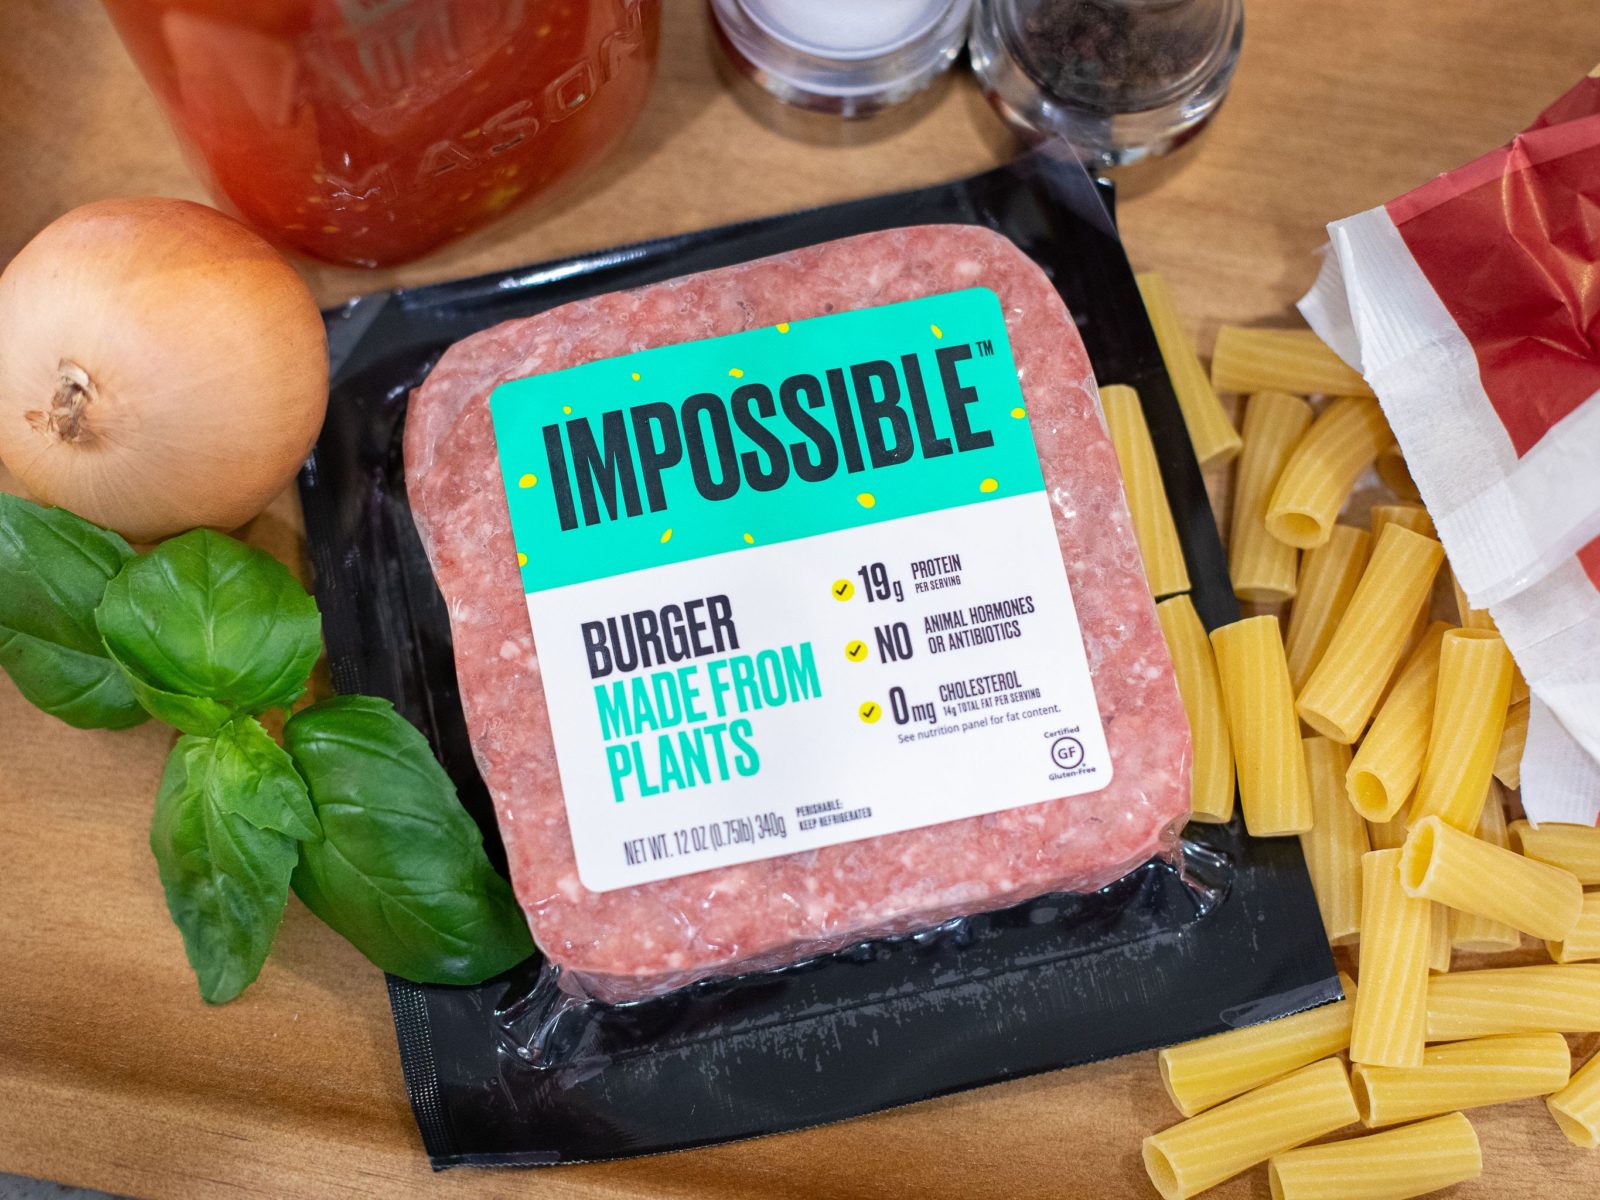 Impossible Burger As Low As $2.80 At Publix